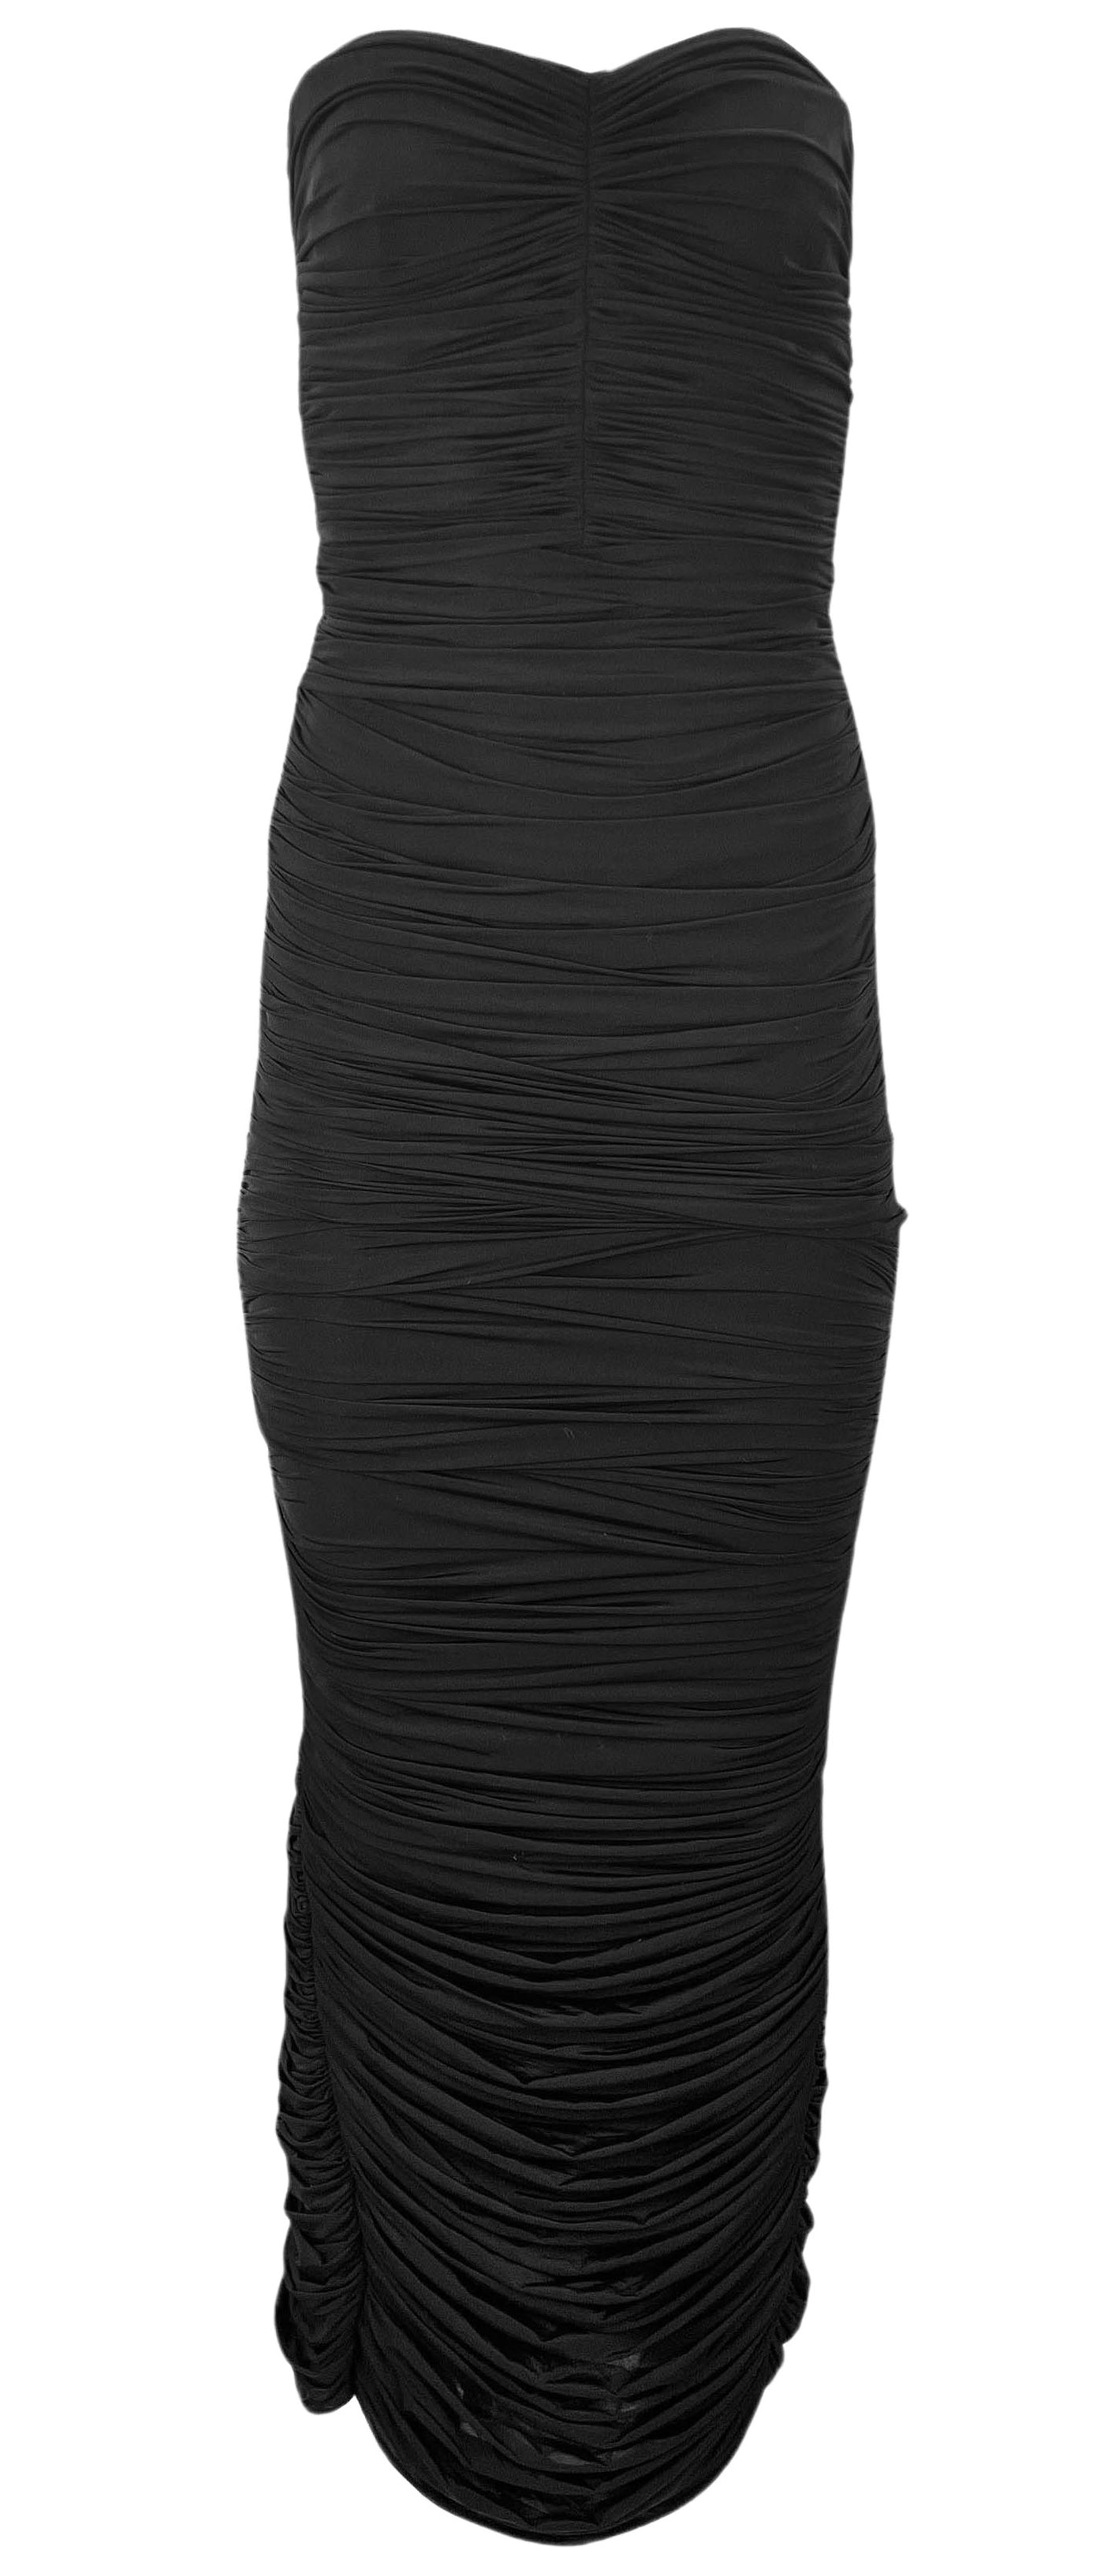 Alex Perry Haynes Ruched Strapless Column Dress with Gloves in Black - Discounts on Alex Perry at UAL